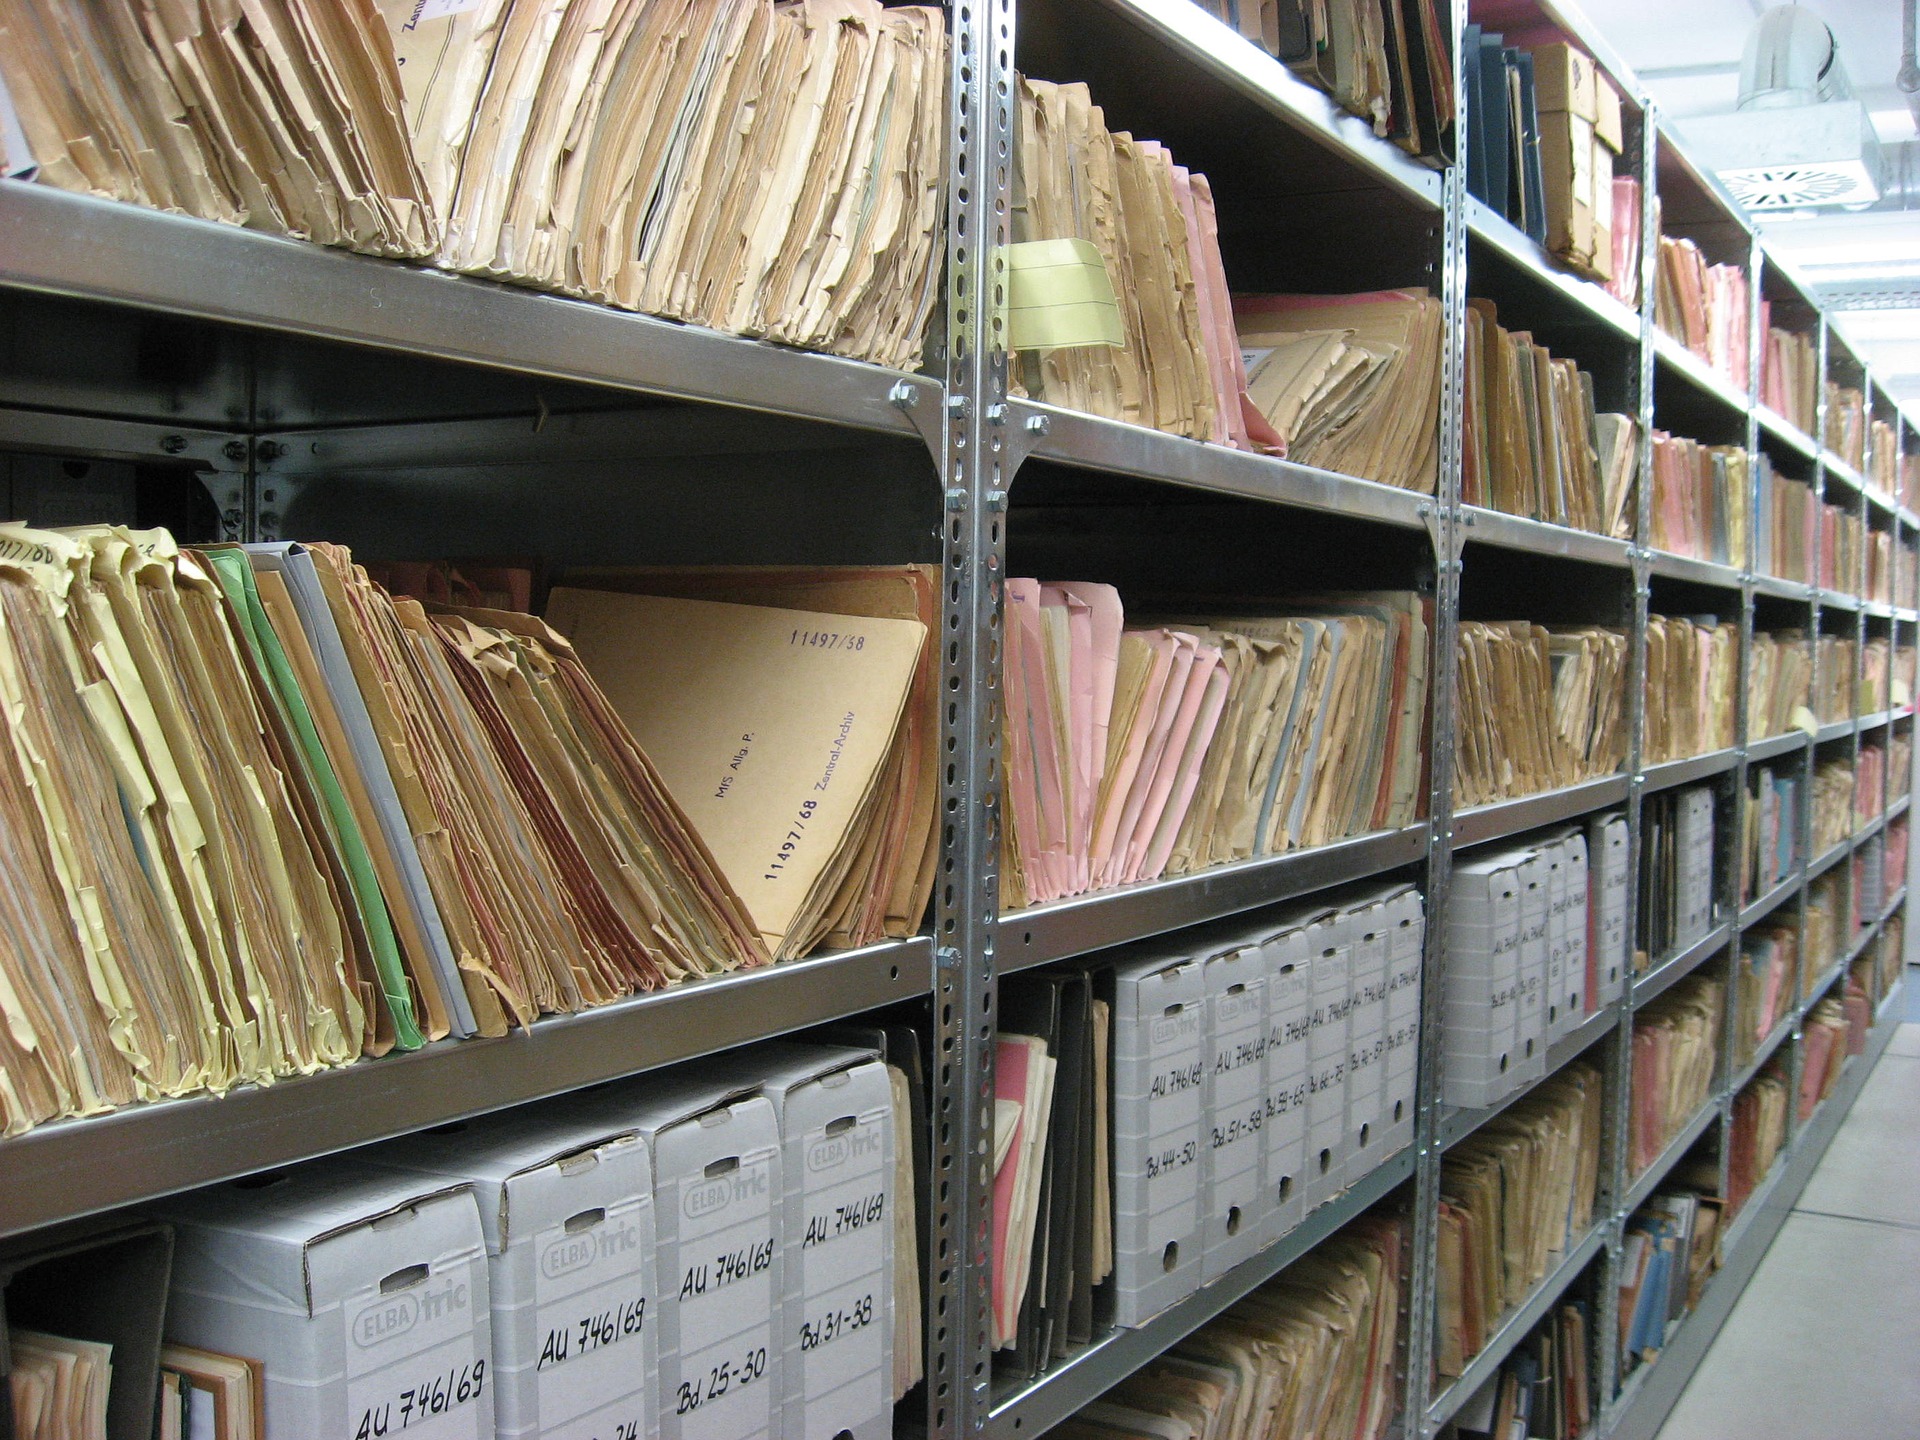 Files for cataloguing and boxing